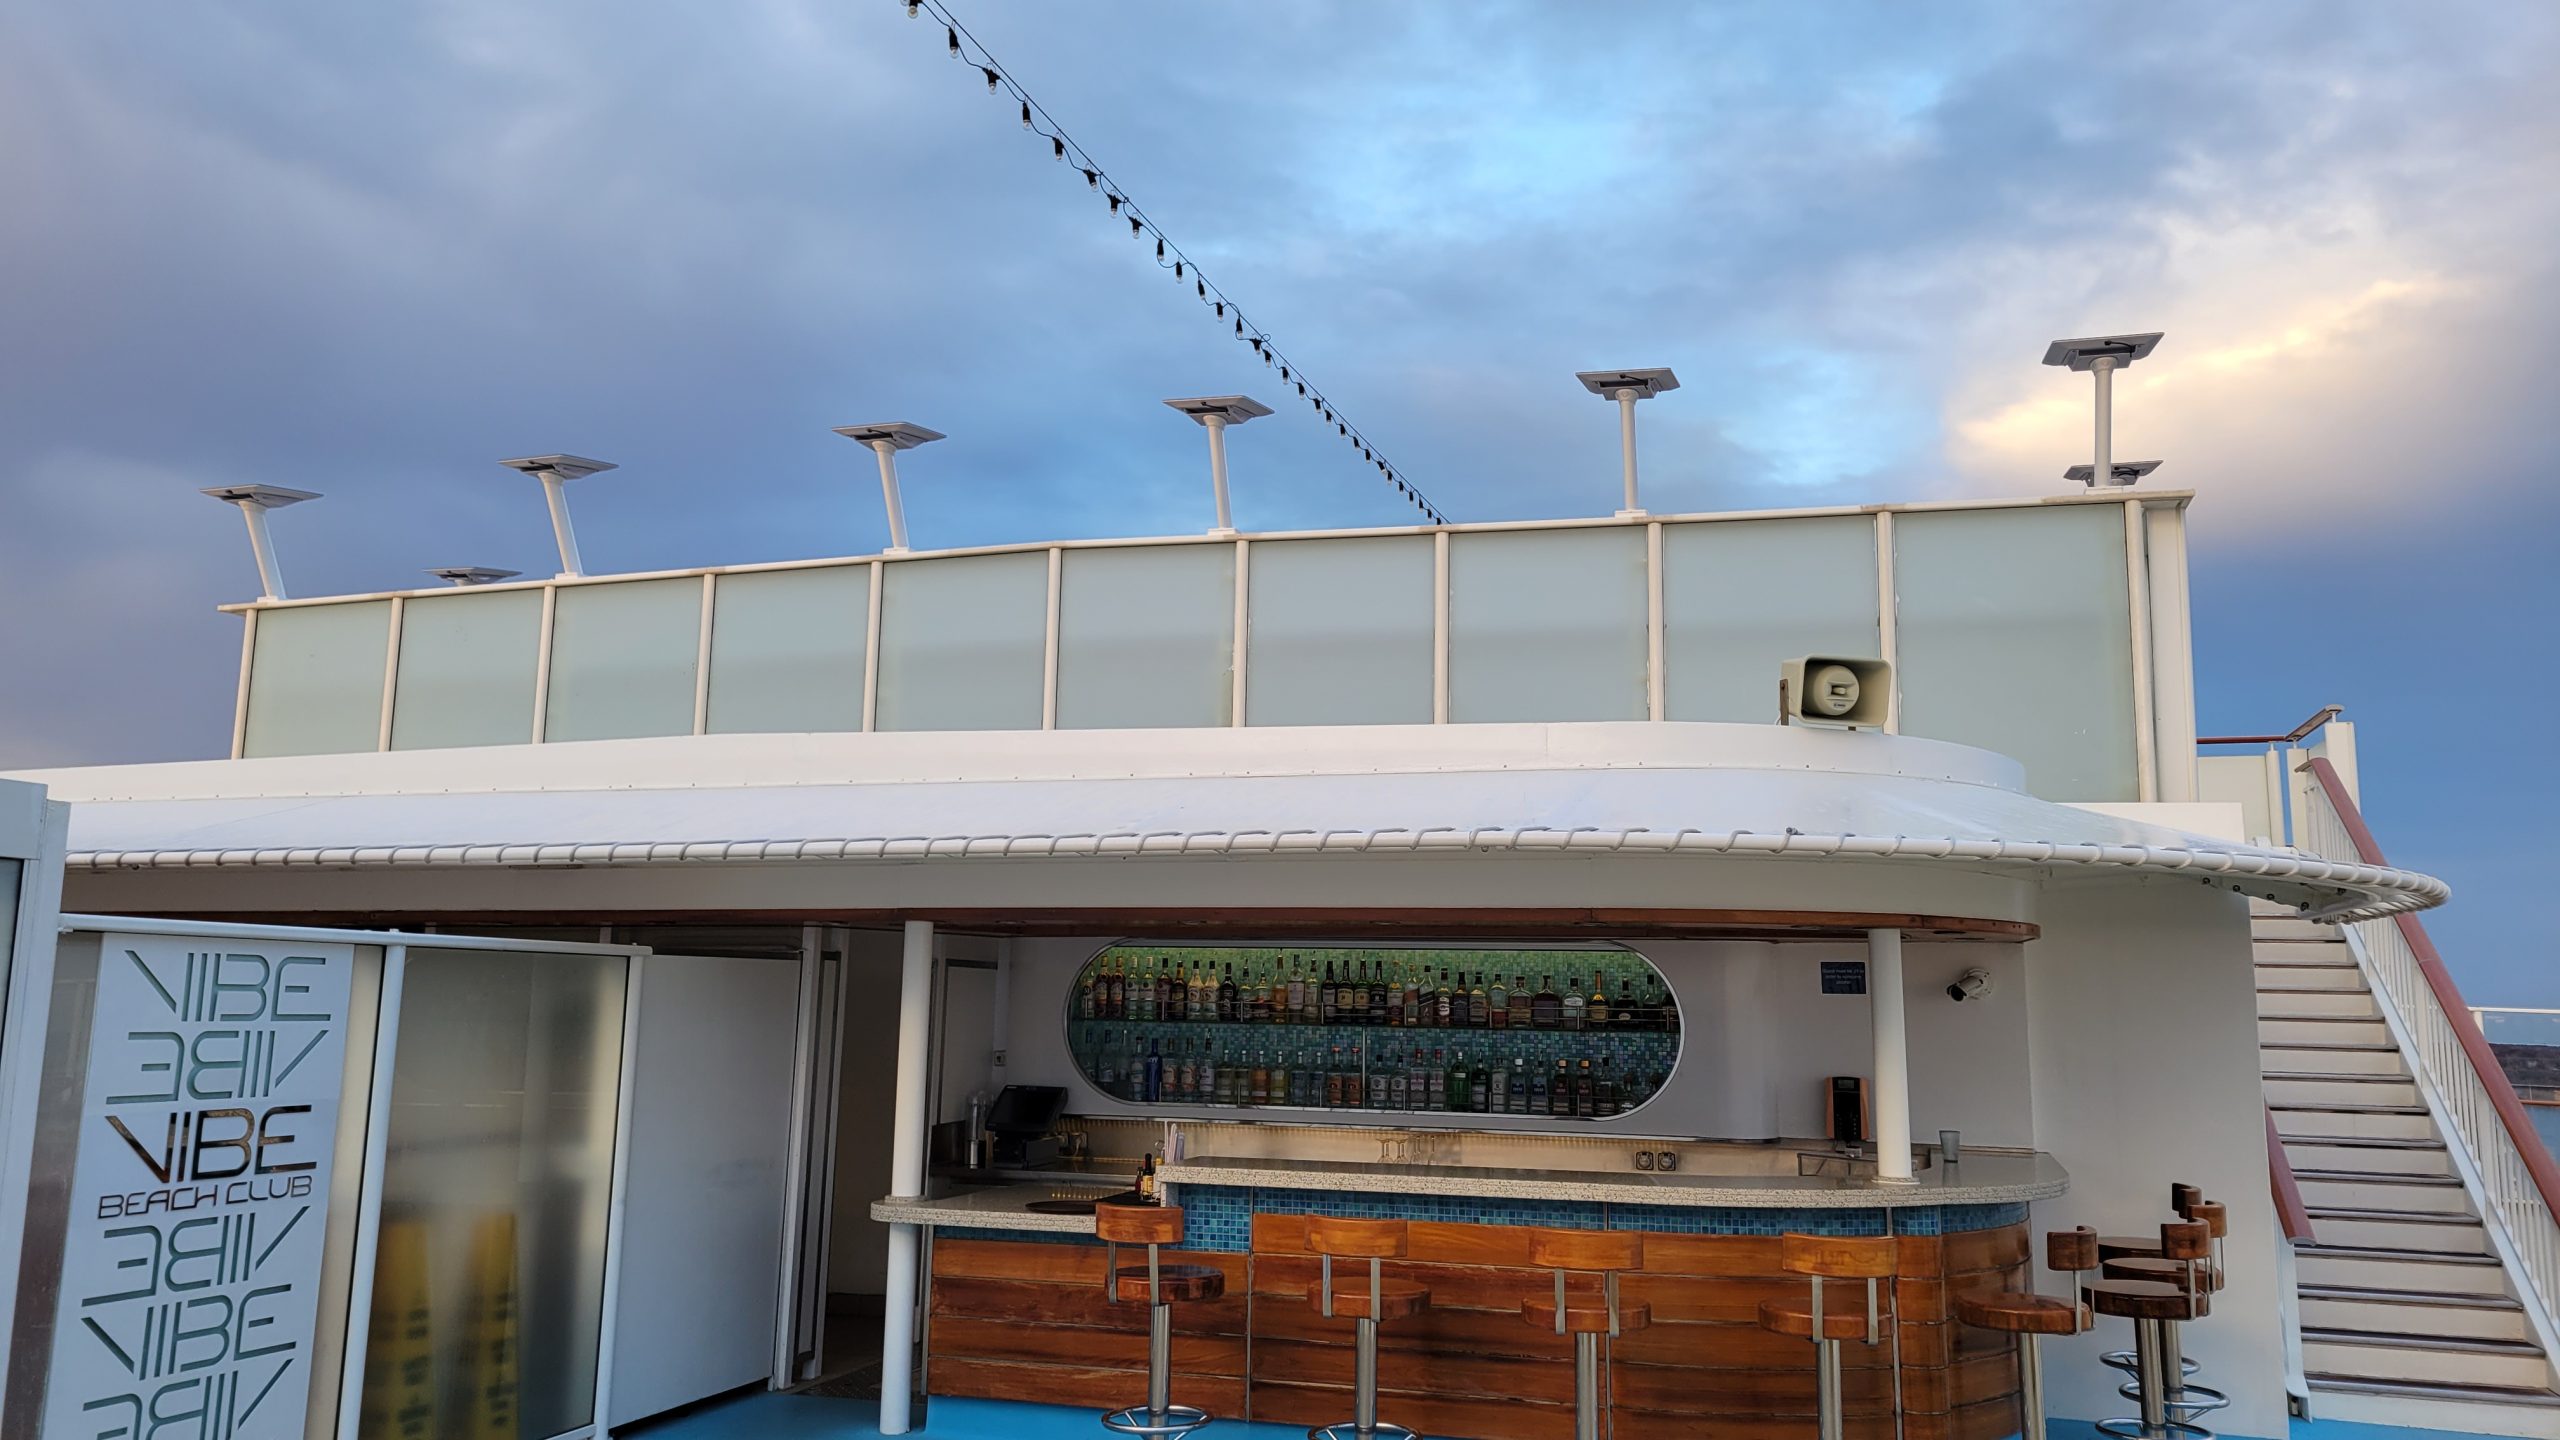 11 Starlink dishes spotted on a Norwegian Breakaway cruise 17